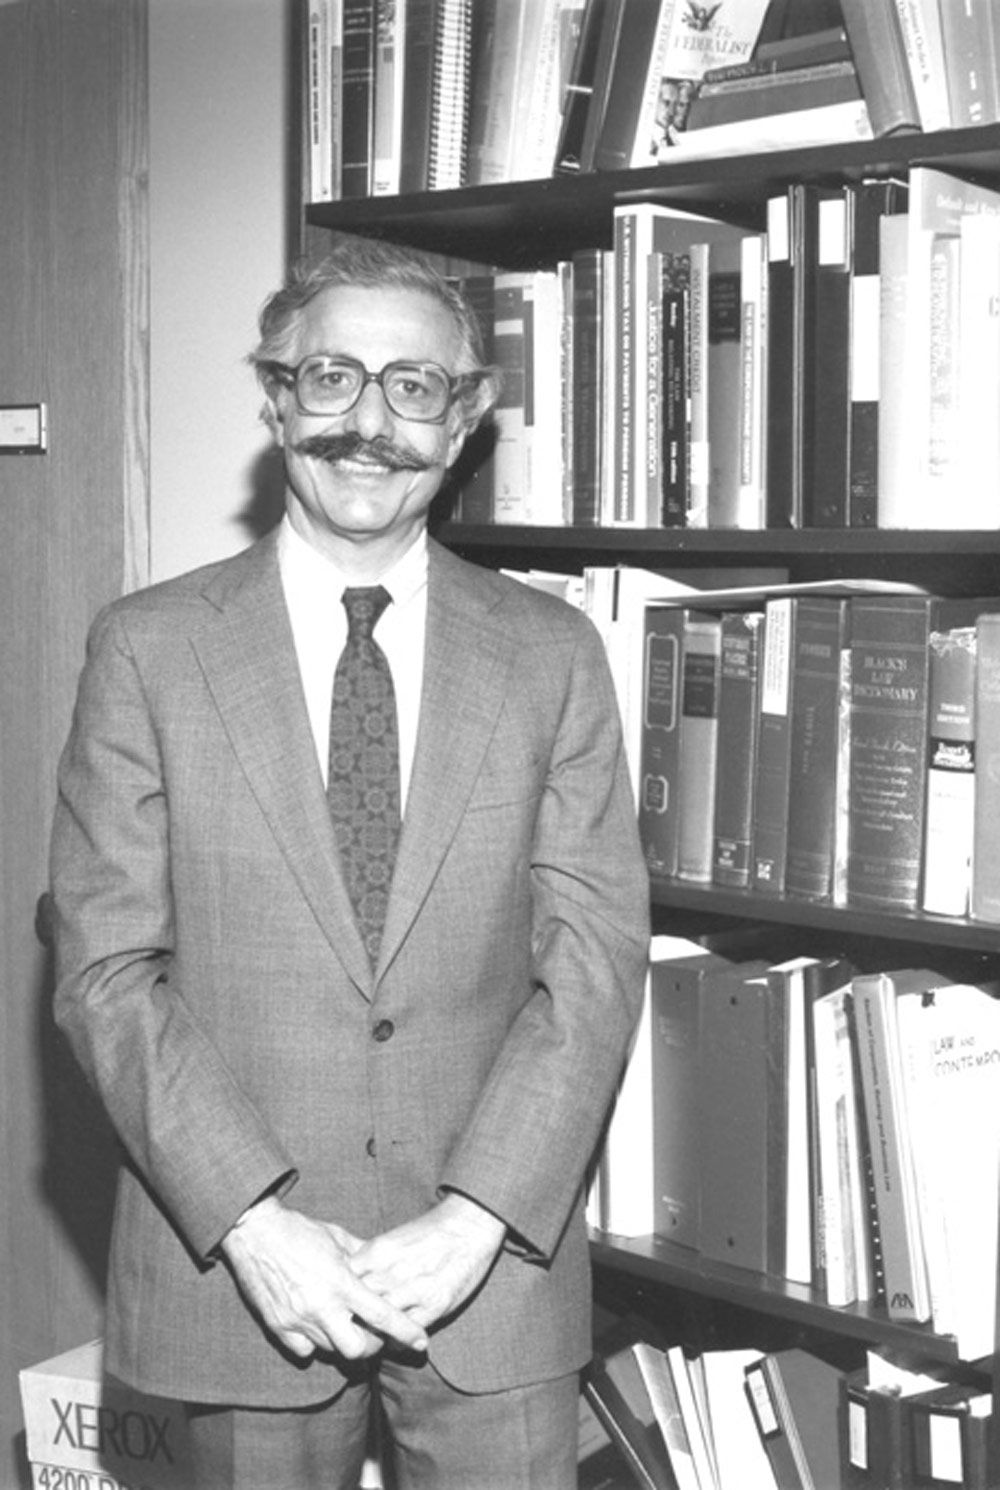 black and white image of Carl Felsenfeld standing in an office, next to a packed book case